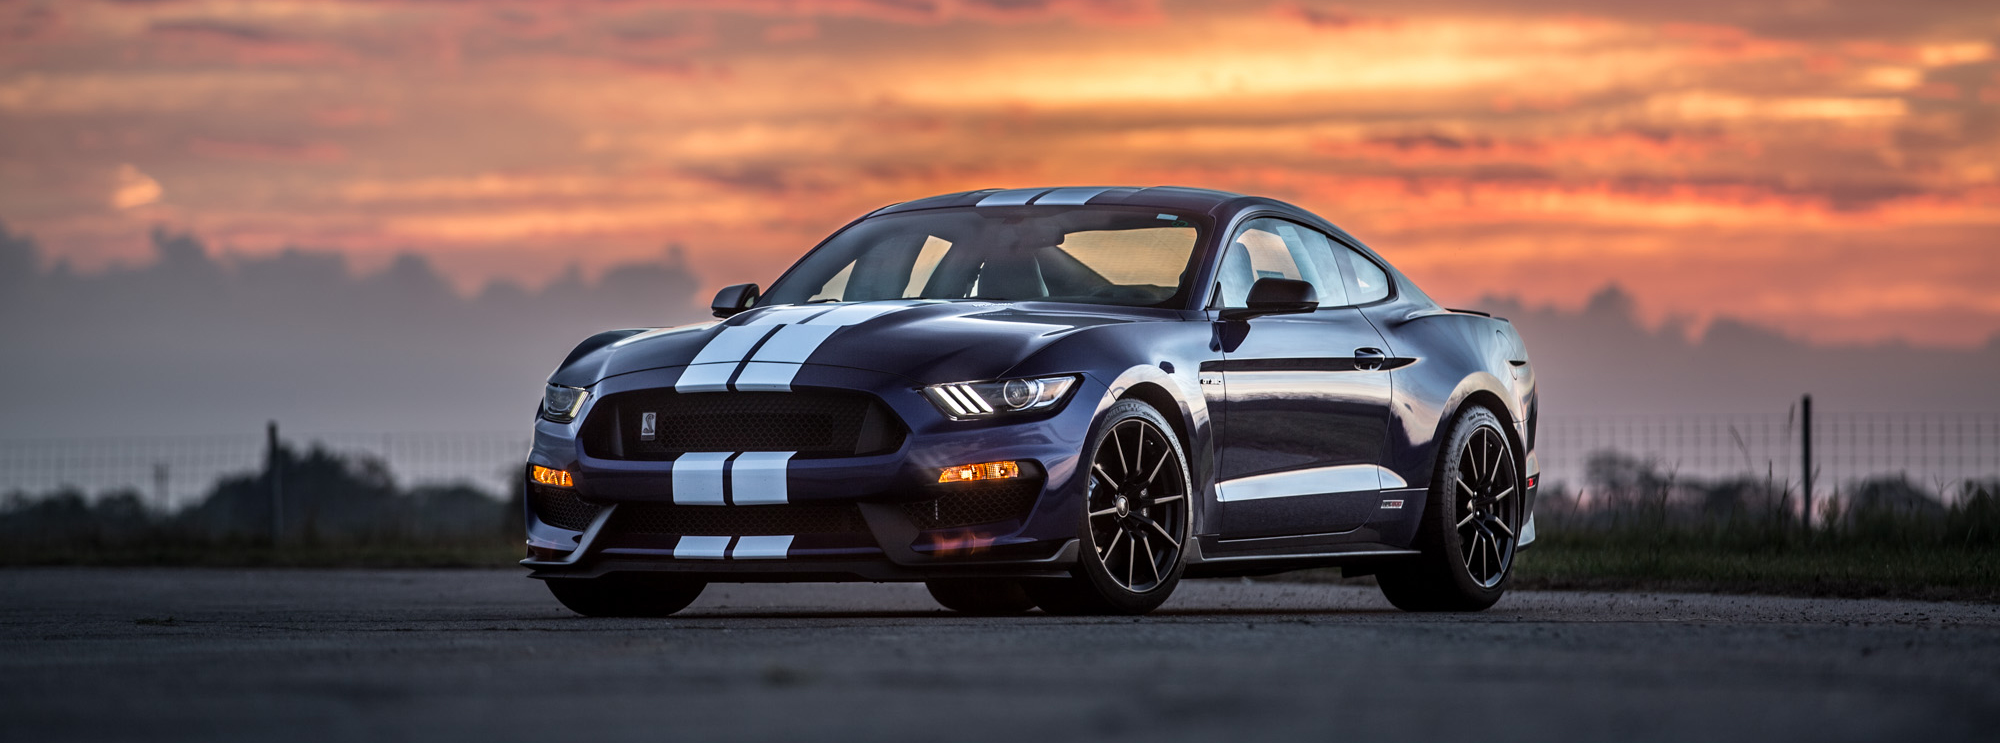 2017 Ford Mustang Shelby GT350 Wallpapers 